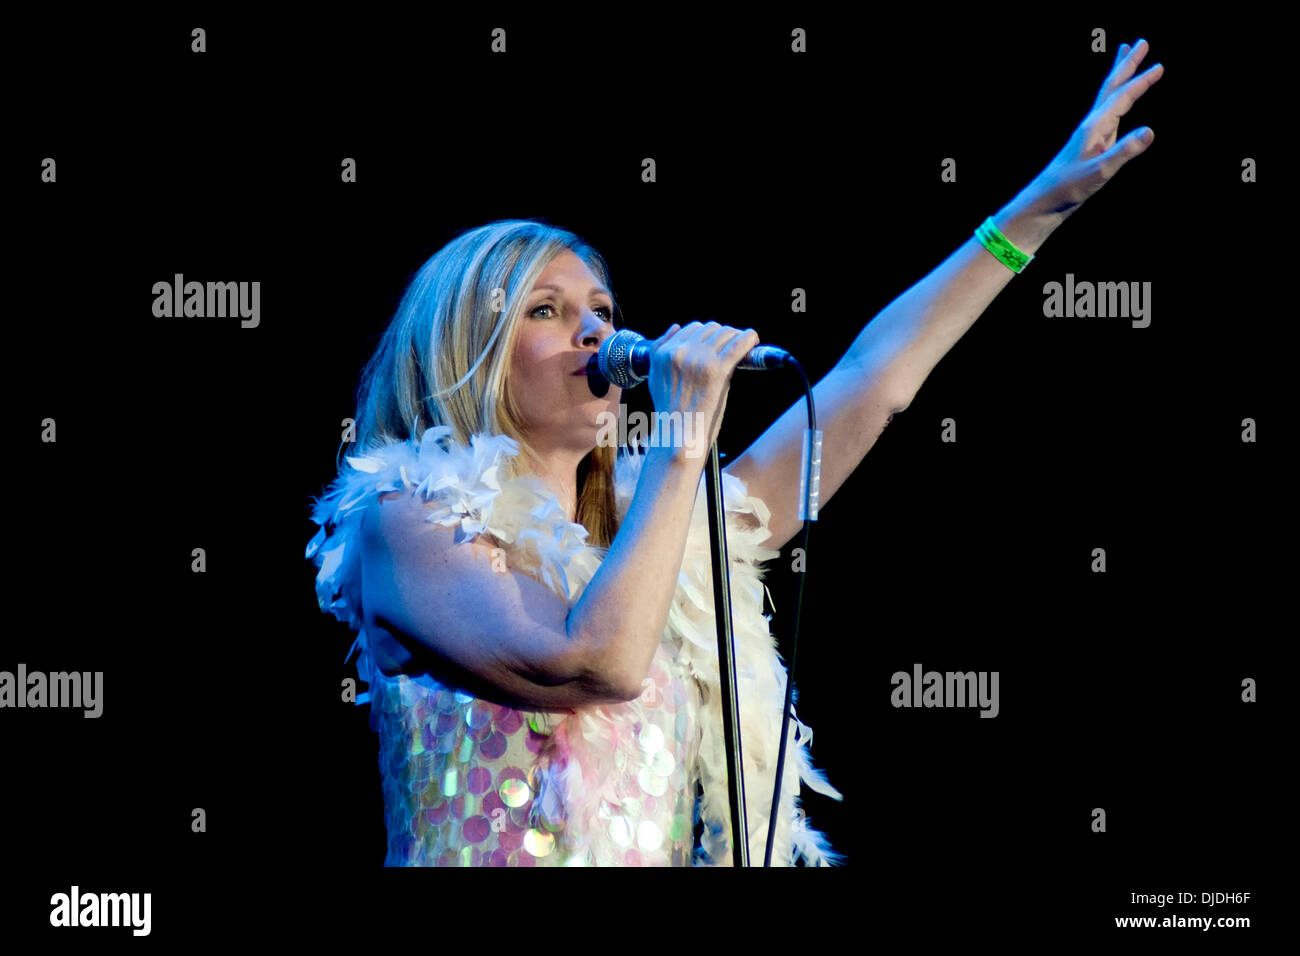 Sarah Cracknell of Saint Etienne performs BT London Live 2012 in Hyde Park London, England - 04.08.12 Stock Photo